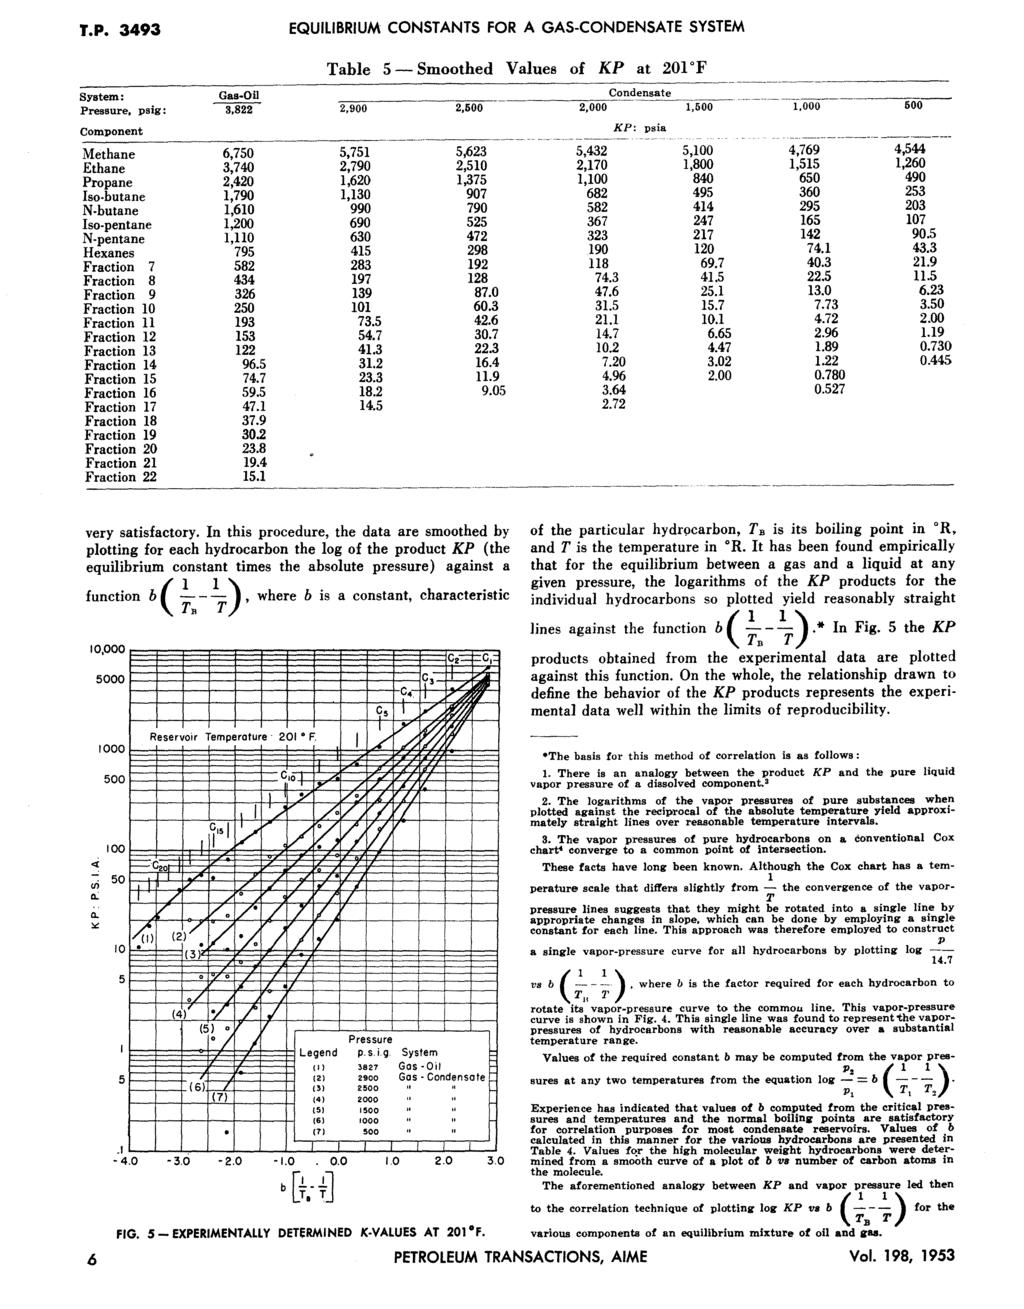 J.P. 3493 EQULBRUM CONSTANTS FOR A GAS-CONDENSATE SYSTEM Table 5-Smoothed Values of KP at 201 F System: Condensate Pressure.